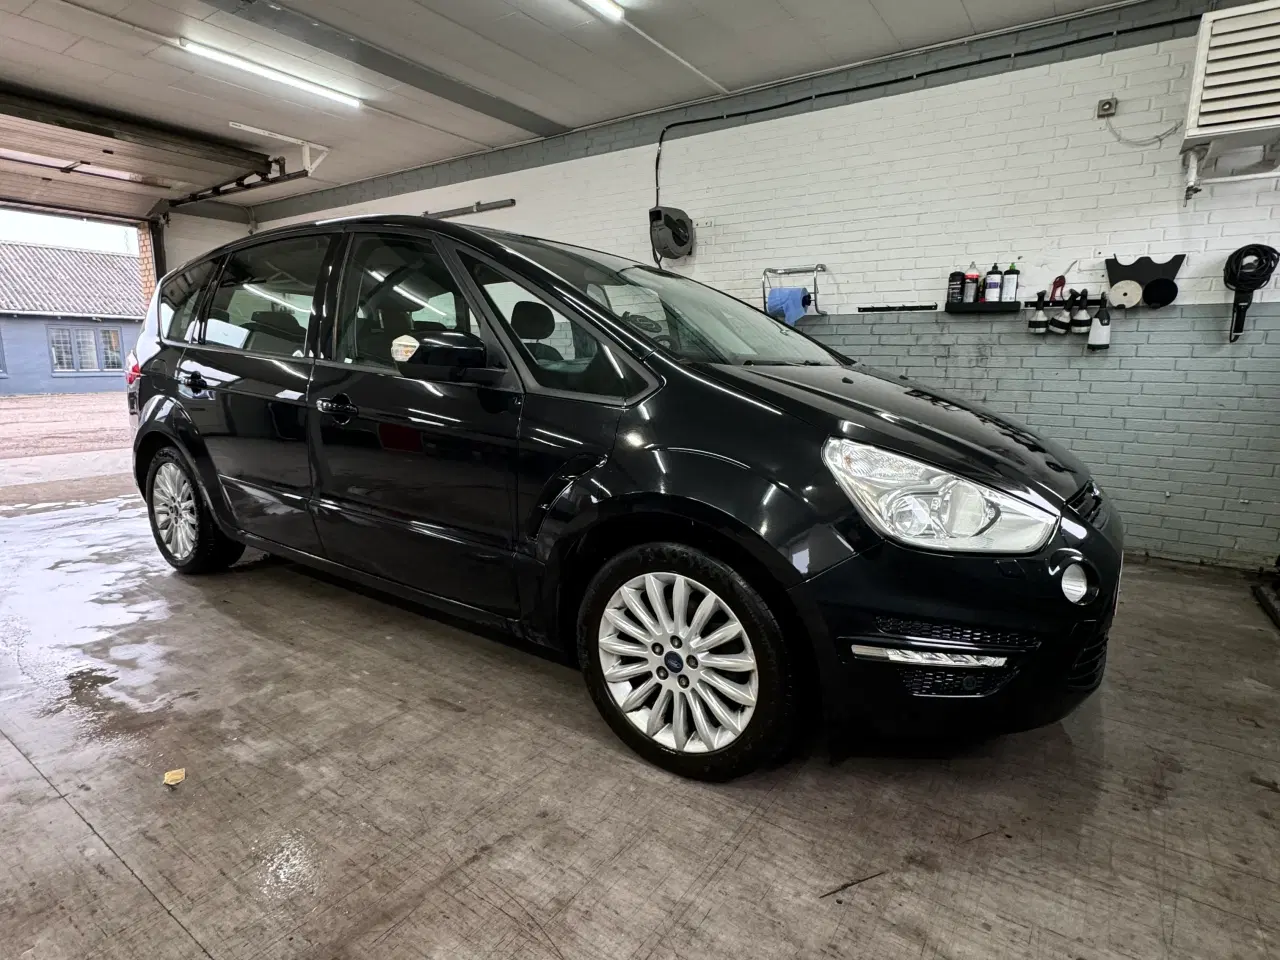 Billede 1 - Ford S-Max - 7 personers 